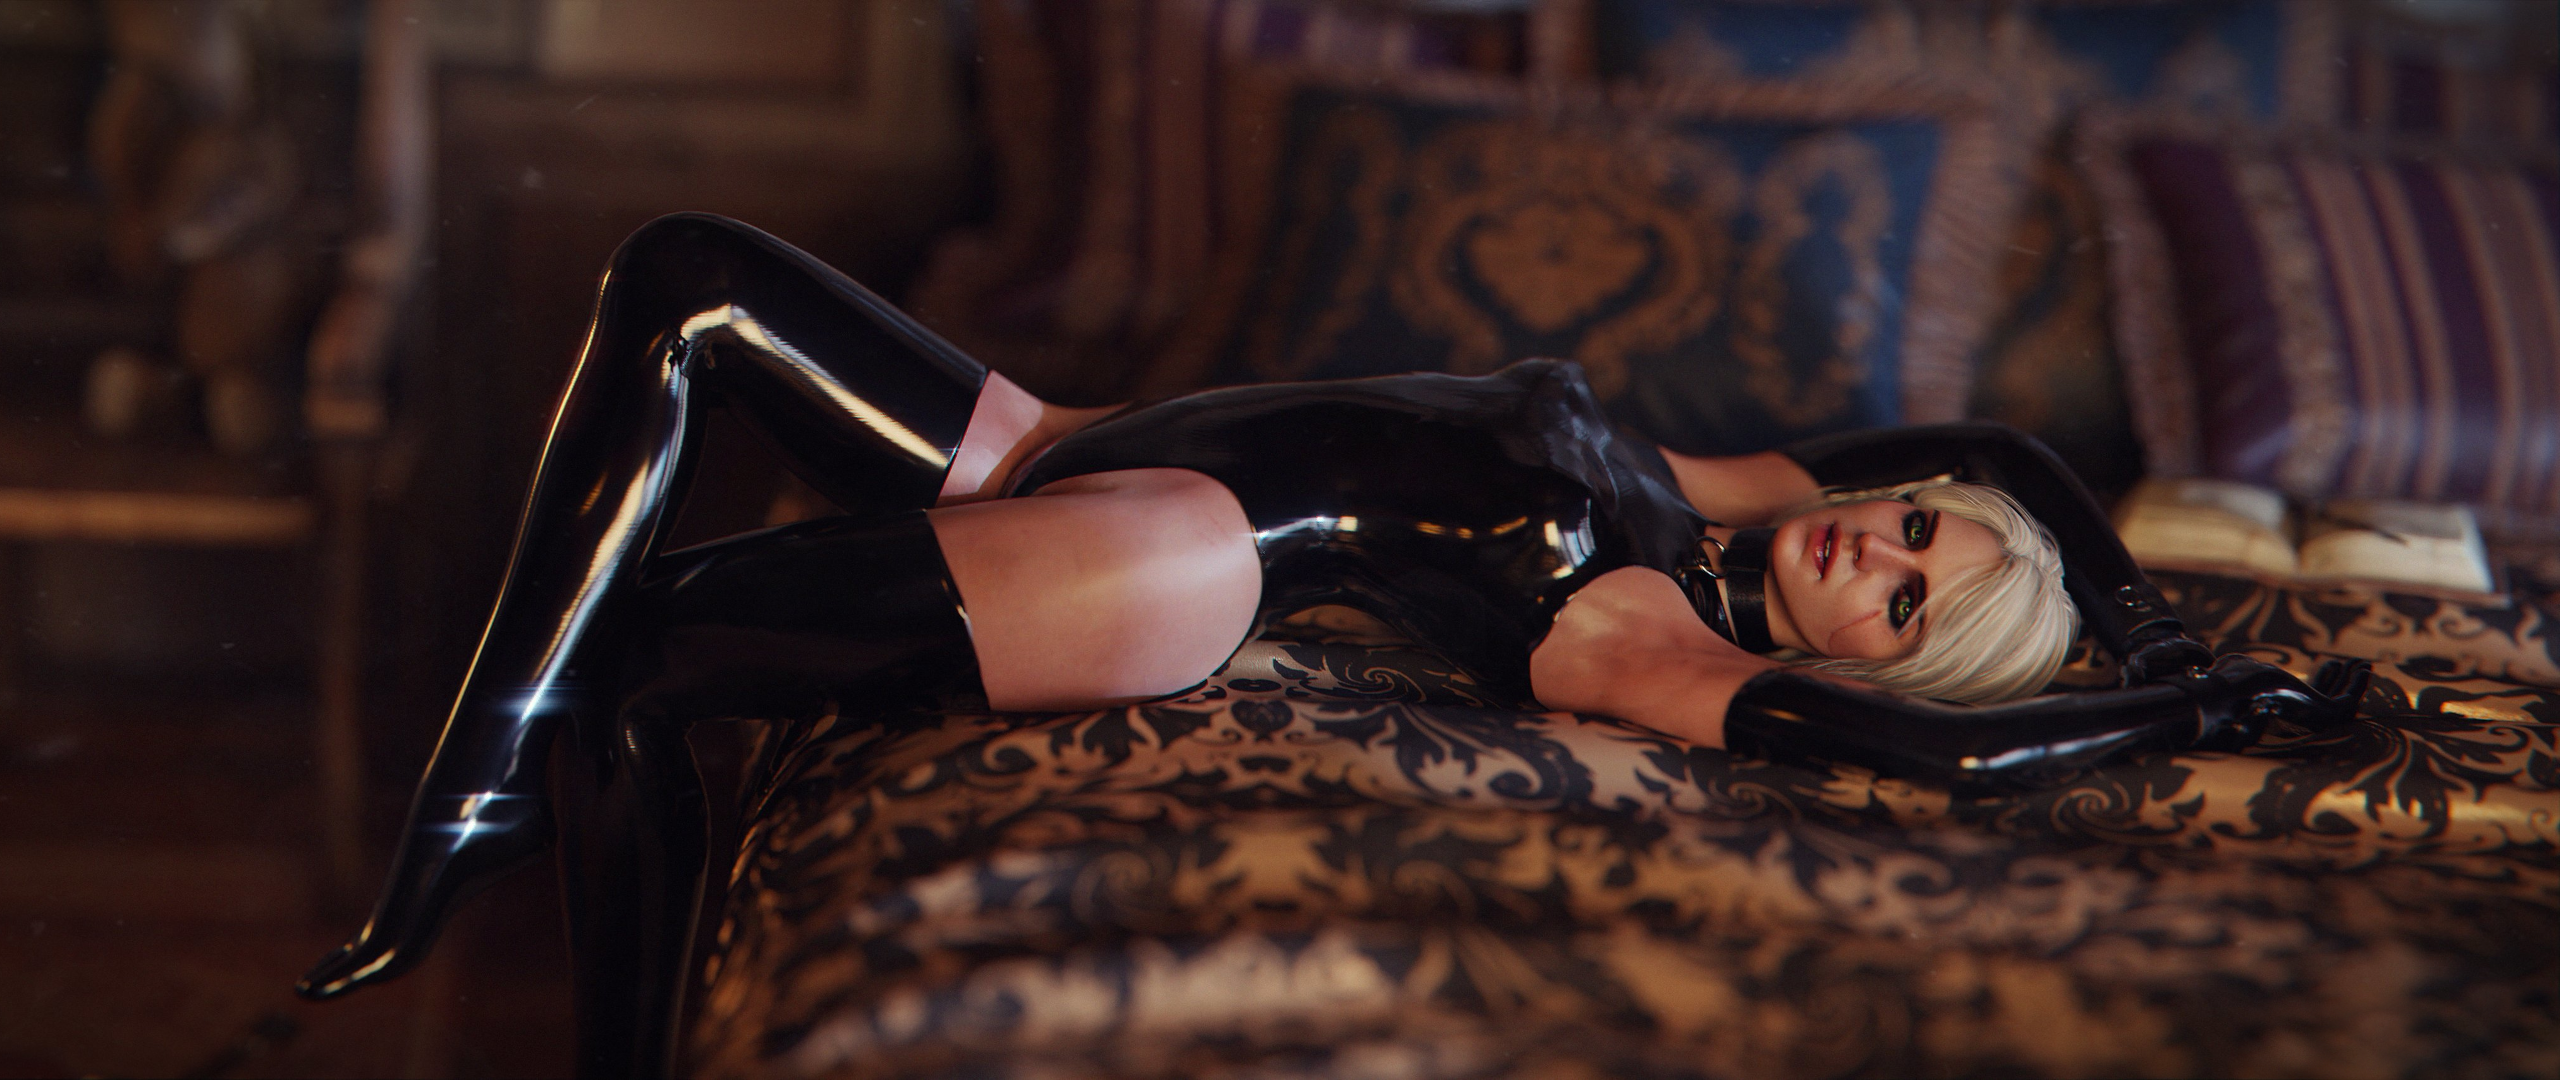 General 2560x1080 Niodreth women artwork The Witcher 3: Wild Hunt Cirilla Fiona Elen Riannon lying on back CGI thighs pillow bed video game characters video game girls video games latex looking at viewer bodysuit